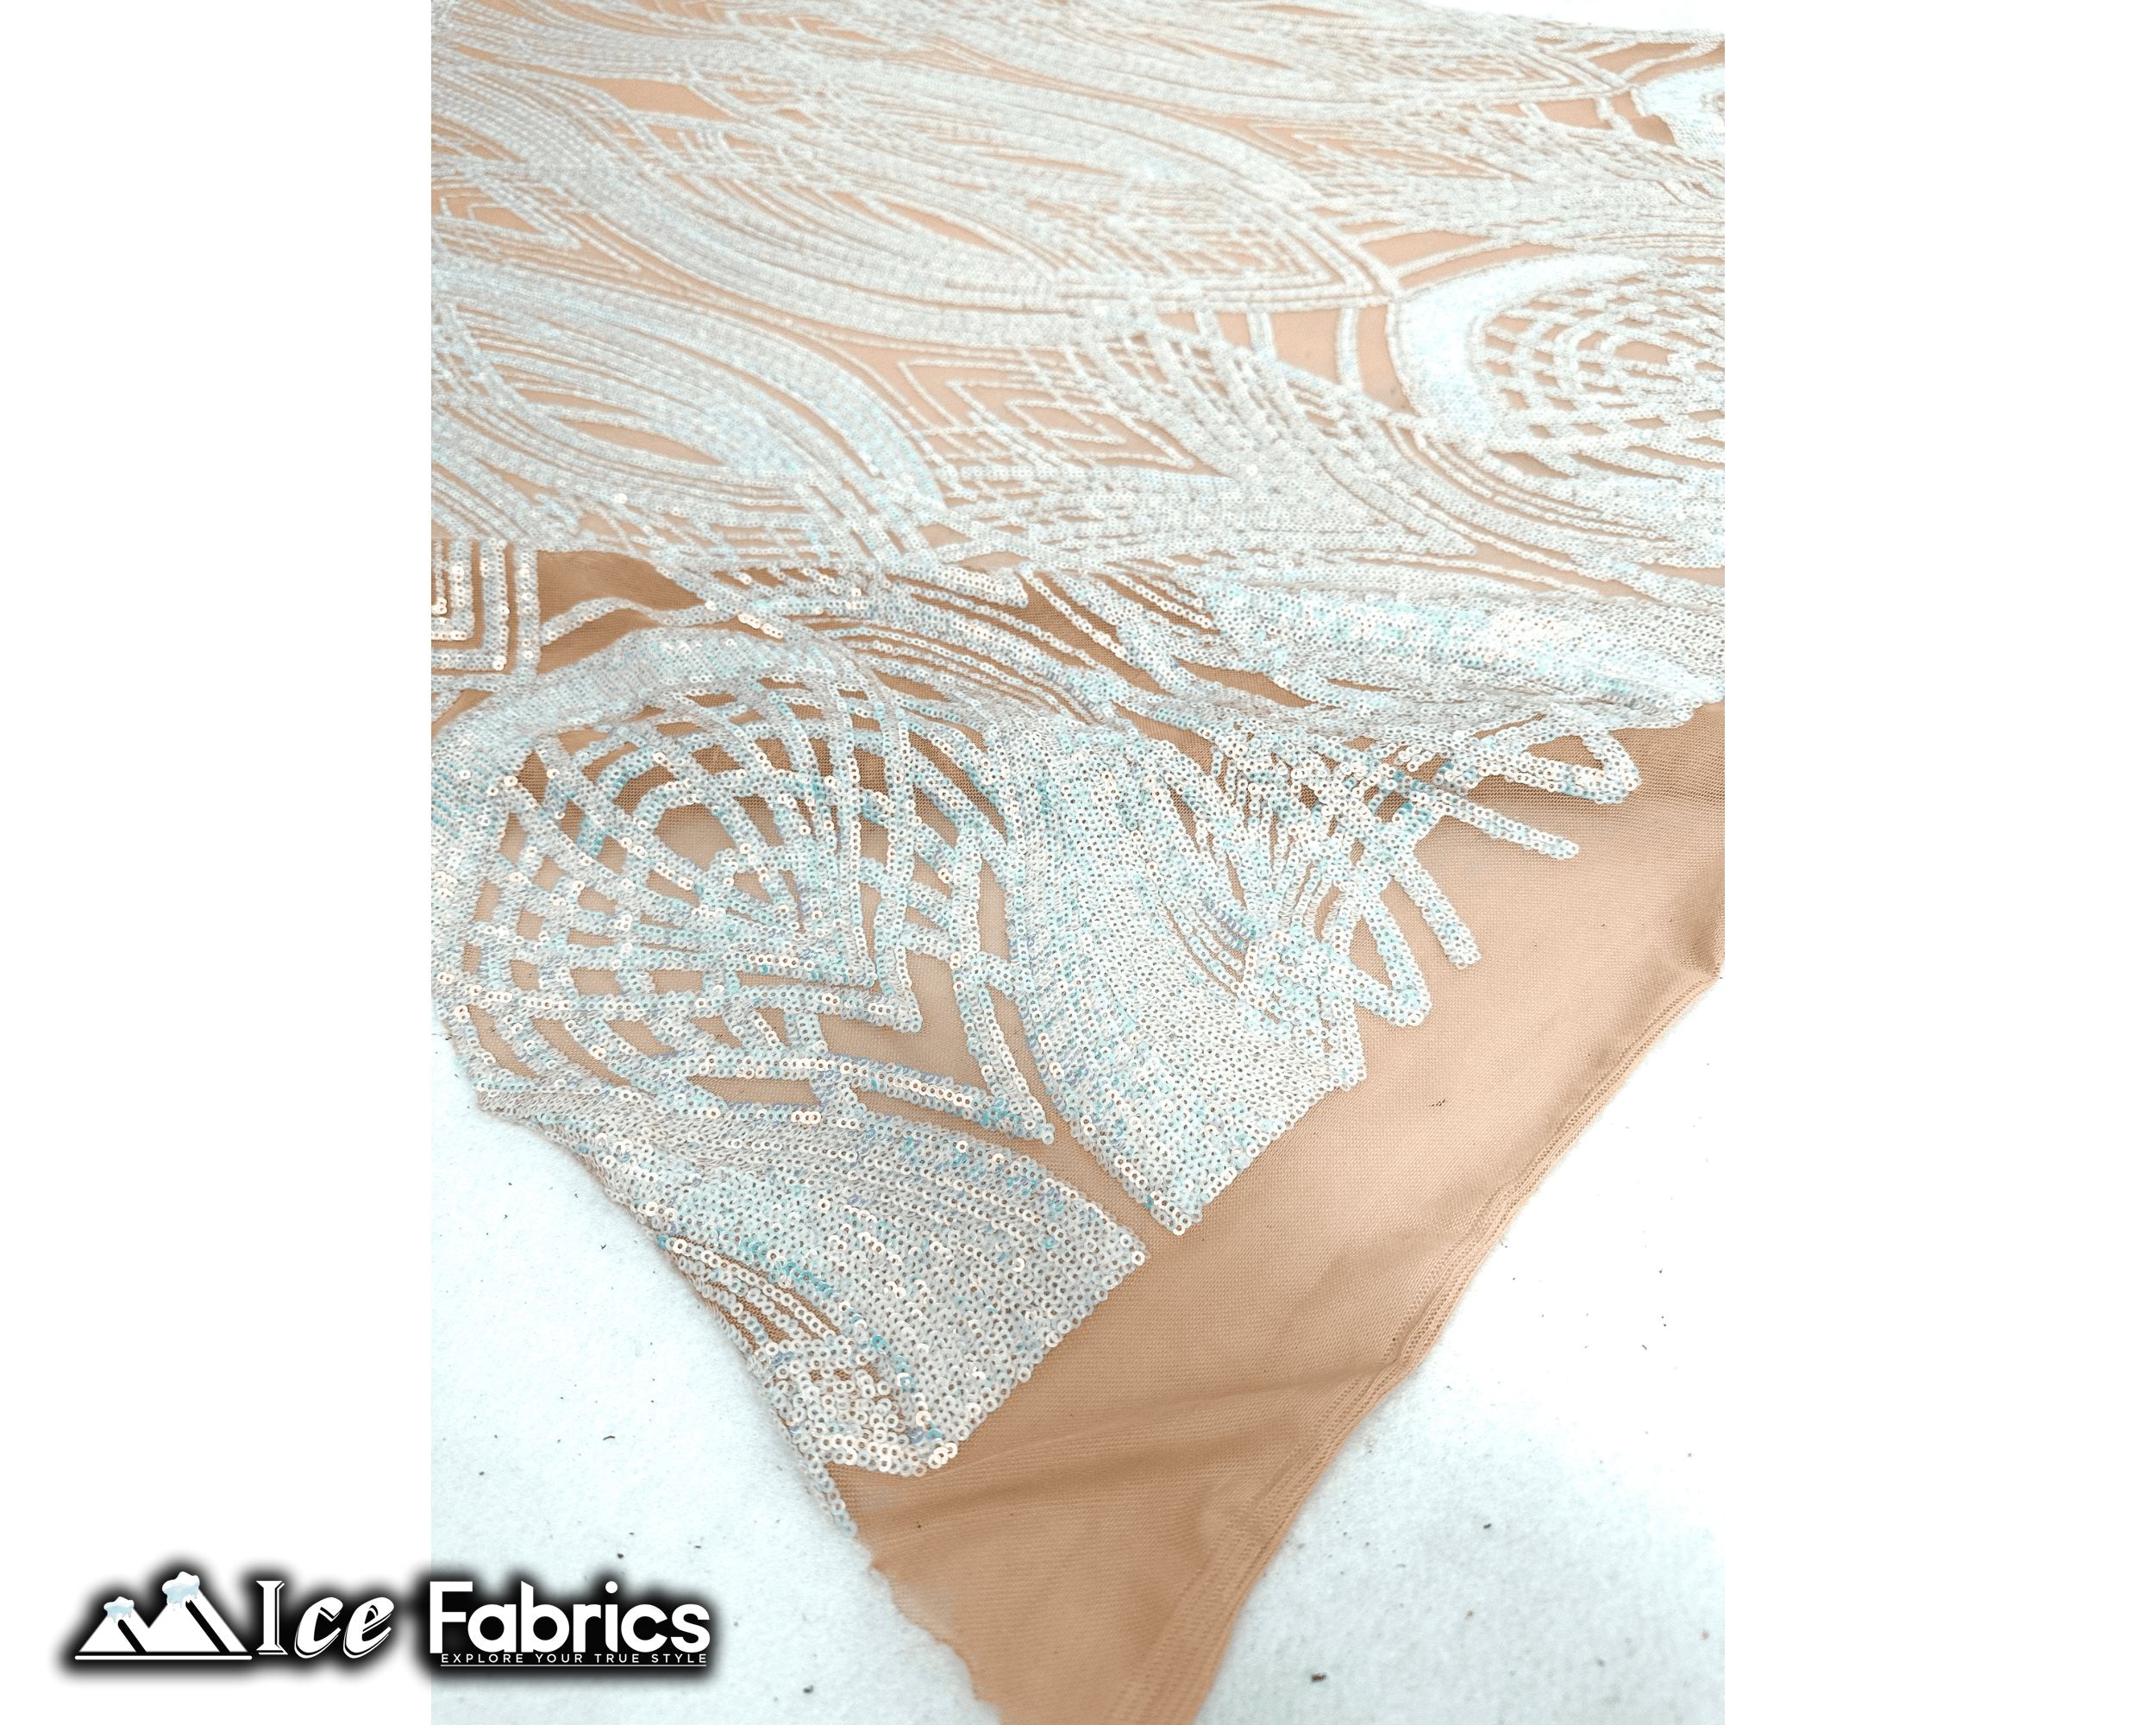 Peacock Sequin Fabric By The Yard 4 Way Stretch Spandex ICE FABRICS White Iridescent on Nude Mesh